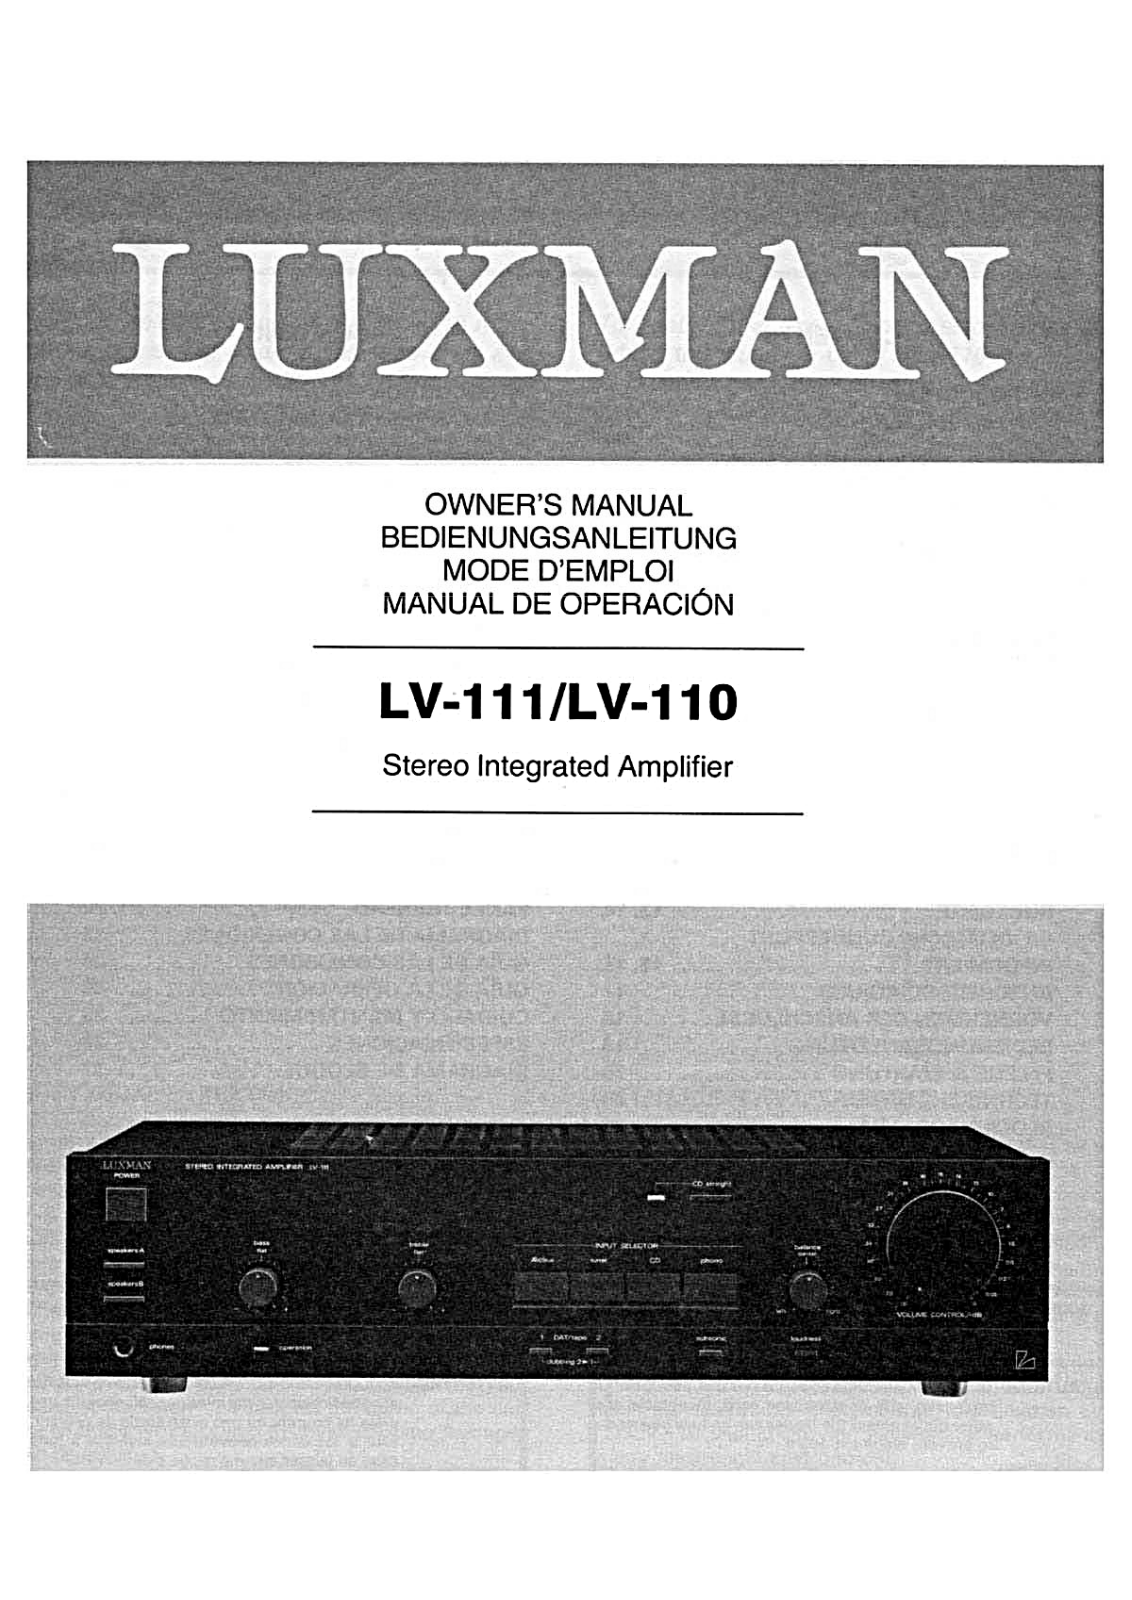 Luxman LV-111, LV-110 Owners Manual